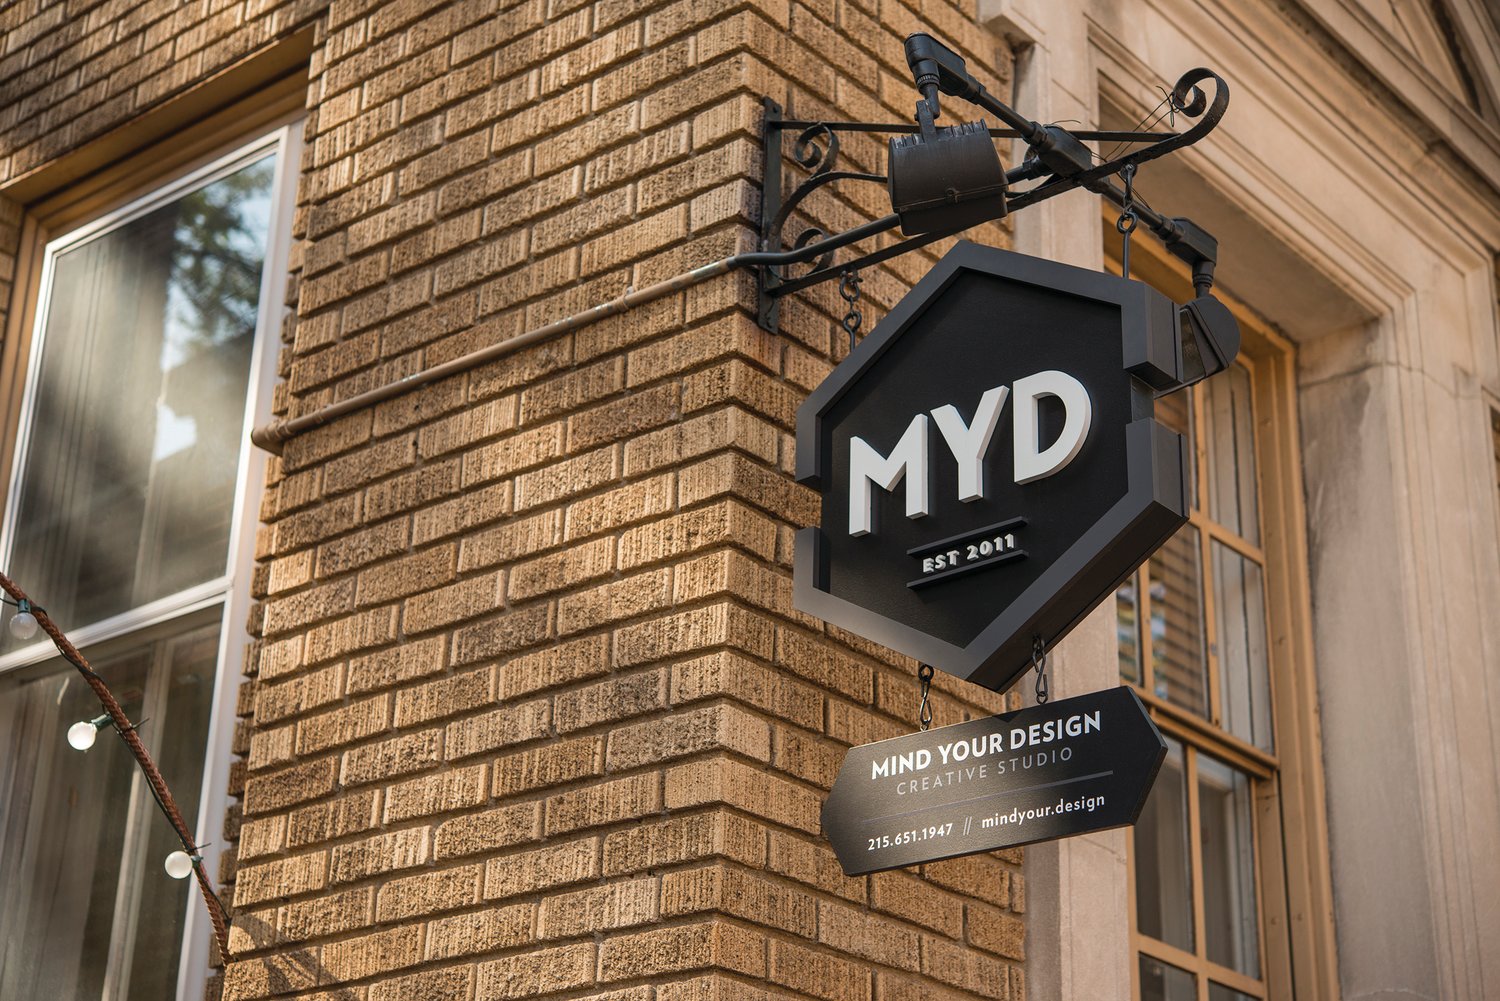 Mind Your Design on Main Street in Doylestown is celebrating 10 years in business.